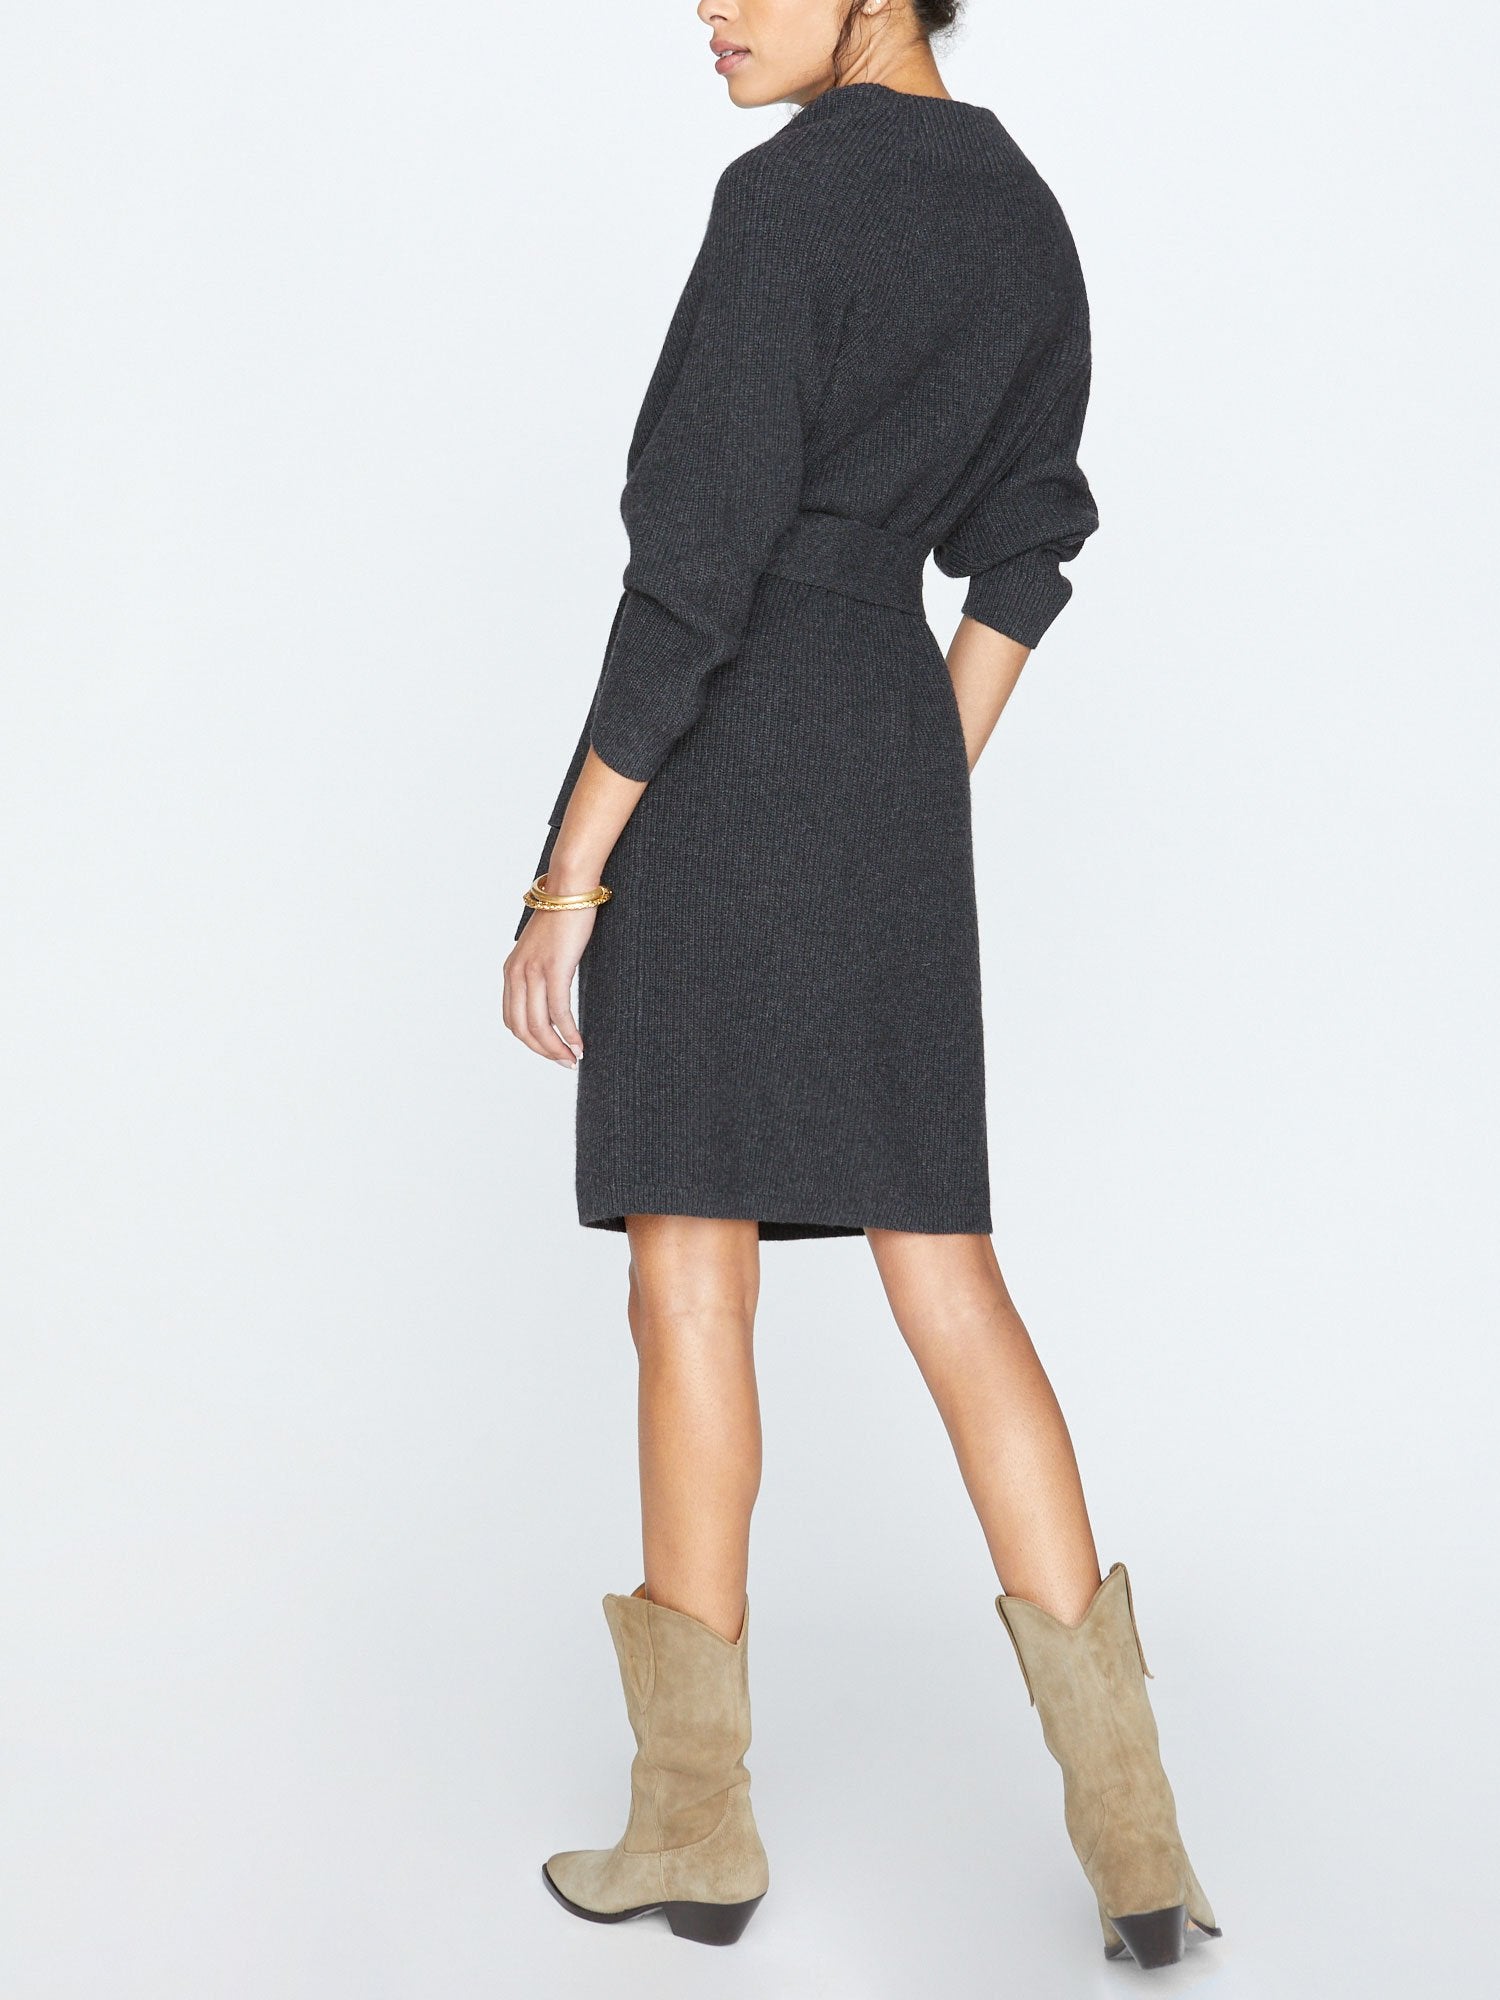 The Leith Belted Dress